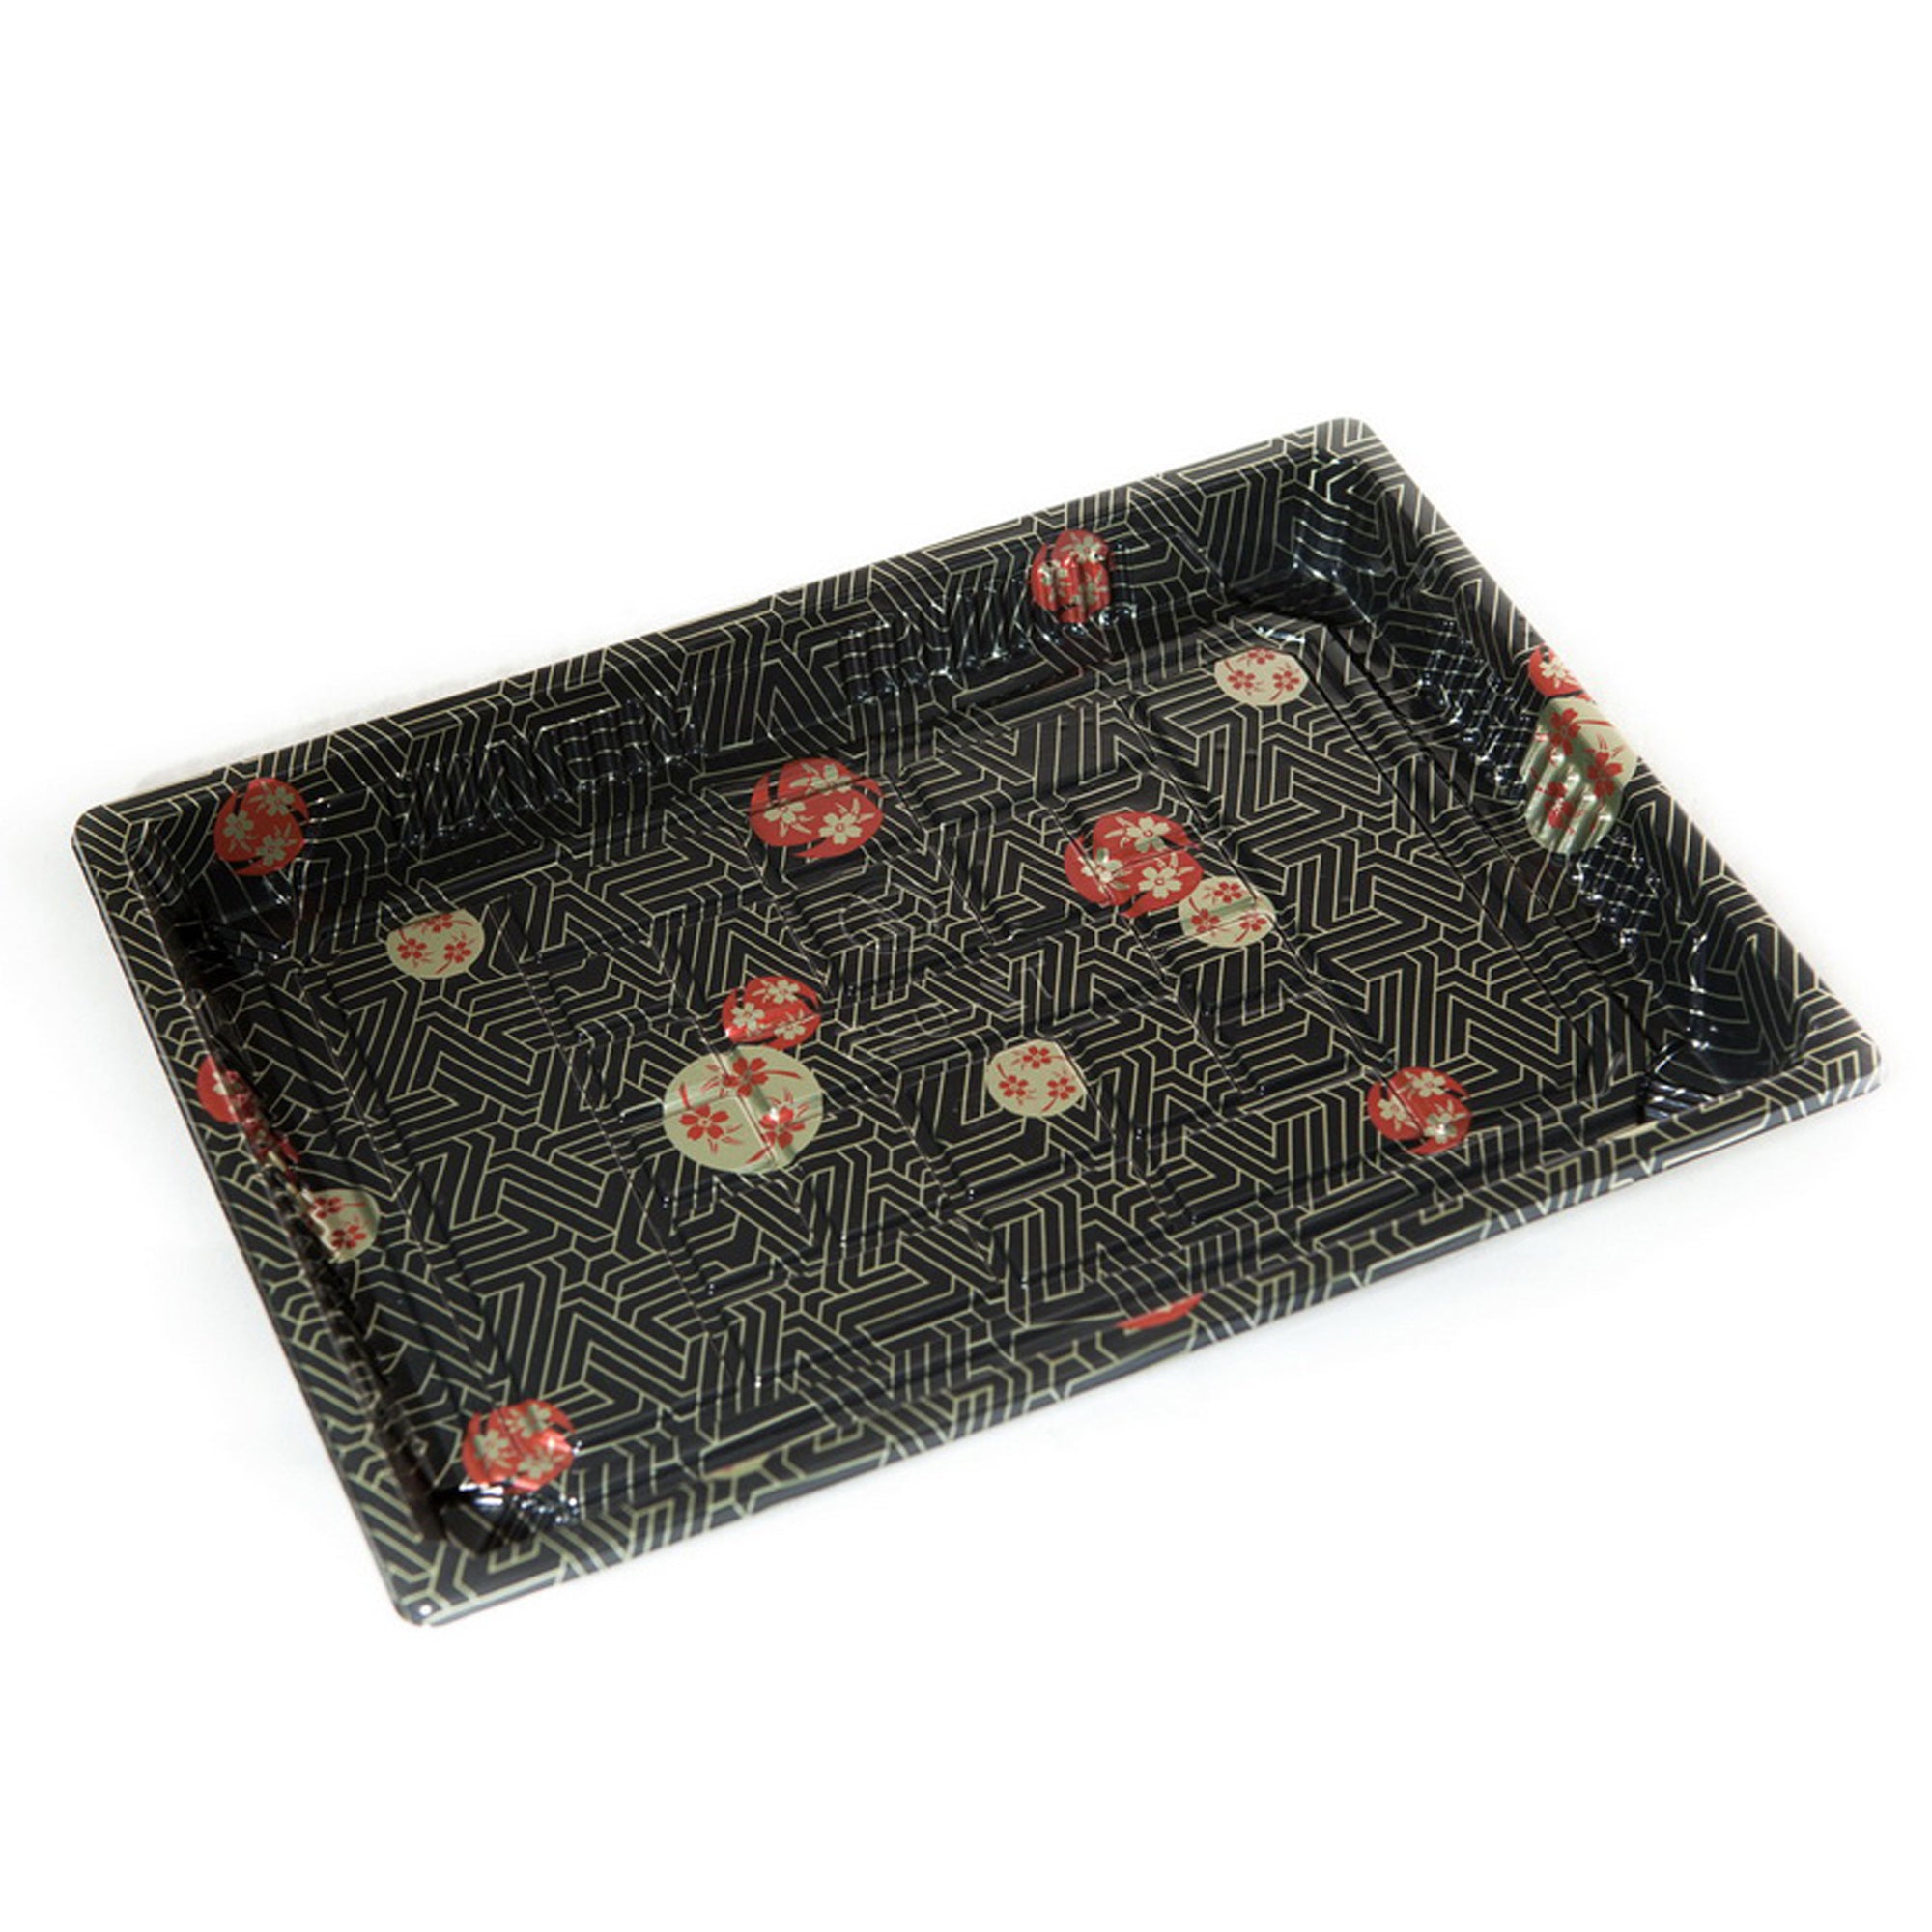 TZ-025 Disposable Black Sakura Design Take Out Sushi Trays with Clear Lids 10 1/4